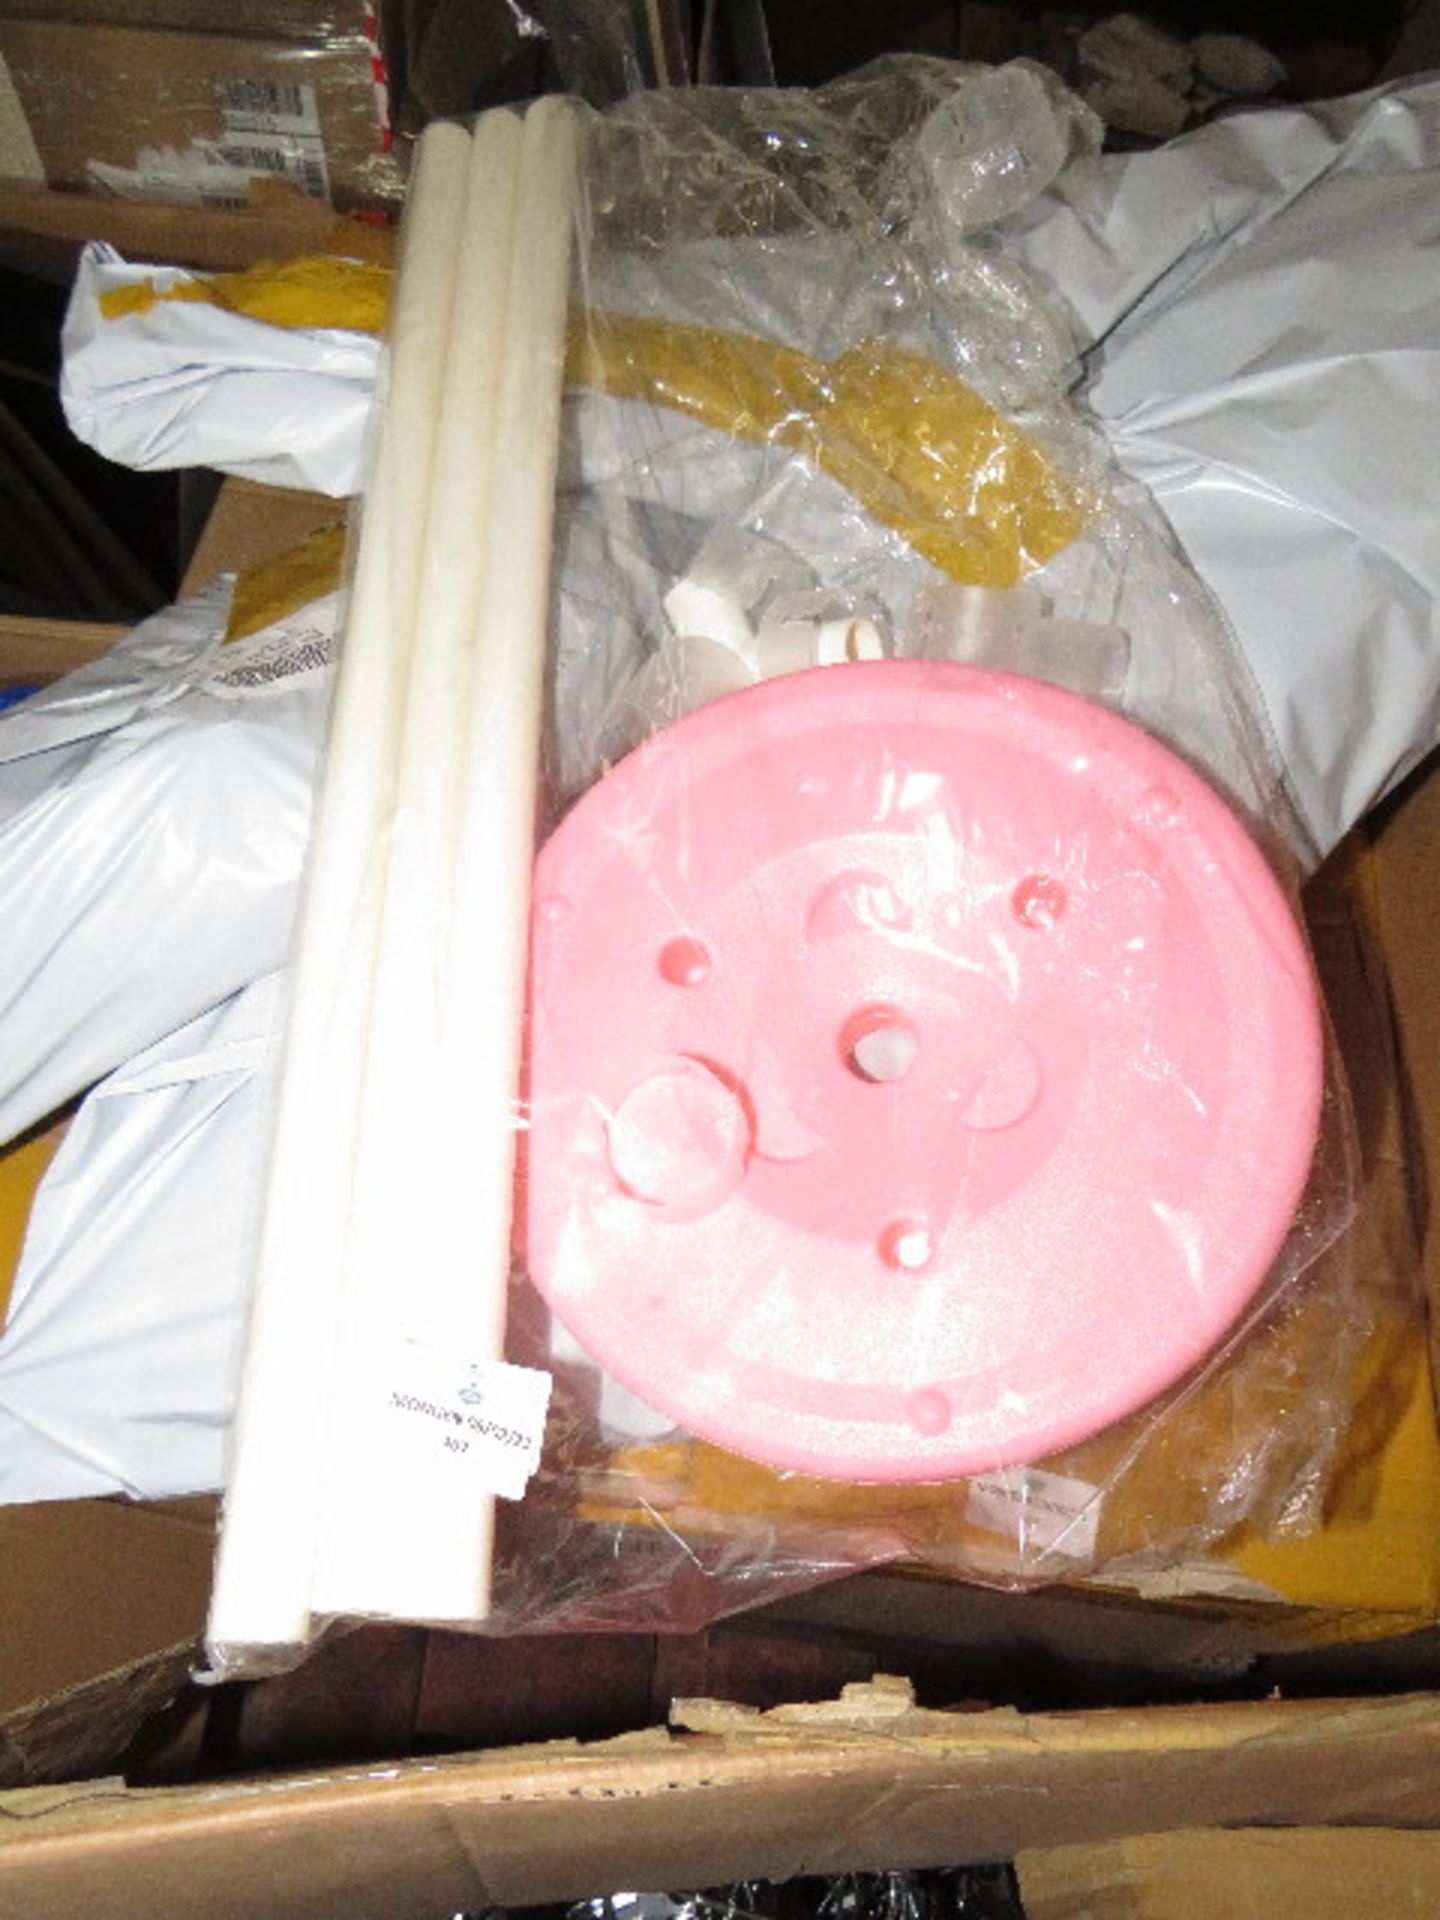 6x Balloon Poles - All Unused & Packaged.